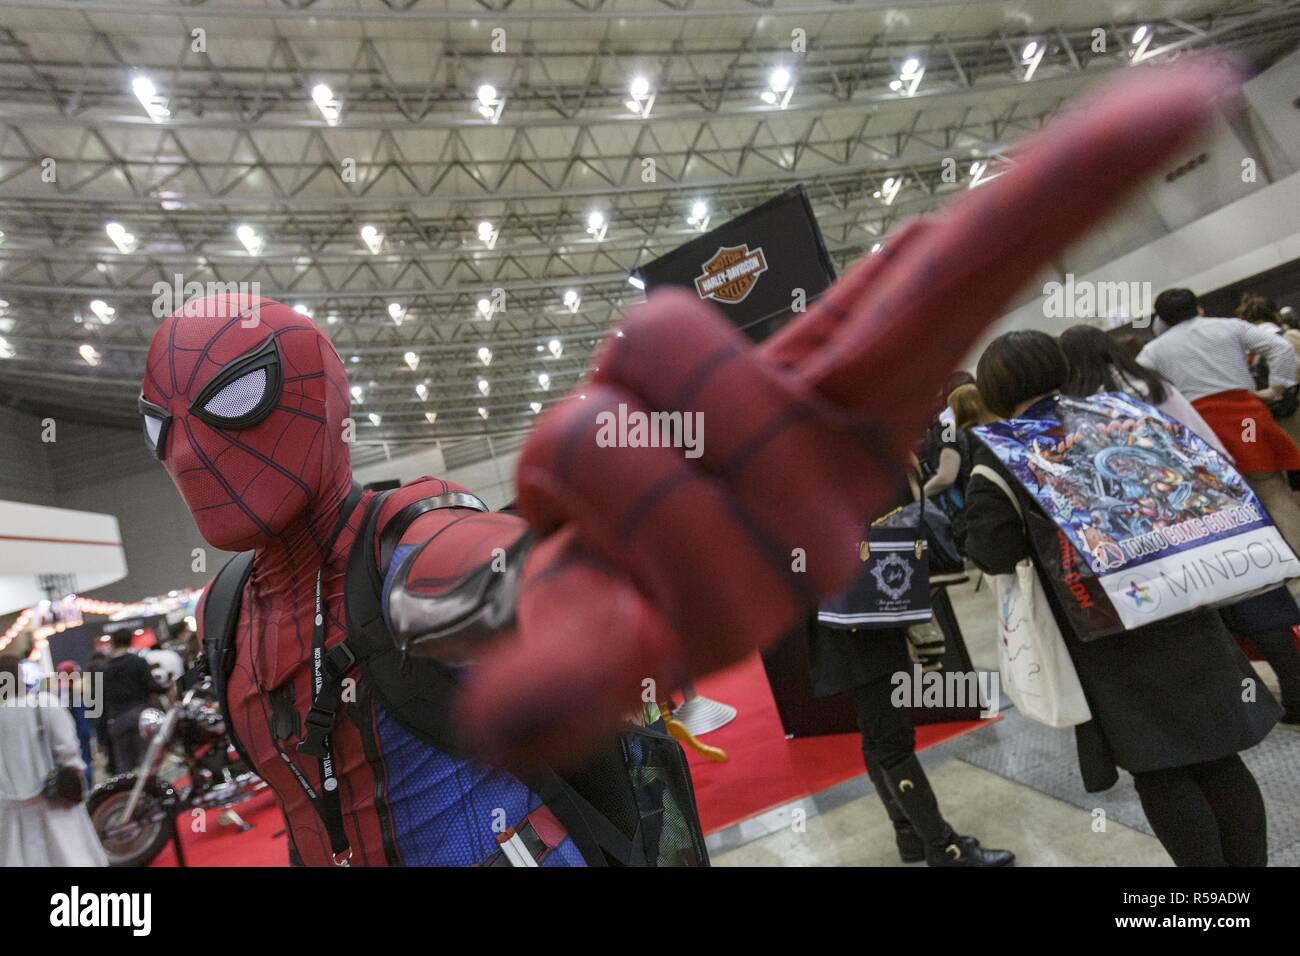 Chiba, Japan. 30th Nov, 2018. A cosplayer dressed as Spider-Man poses for a photograph during the Tokyo Comic Con 2018 at Makuhari Messe International Exhibition Hall in Chiba. Organizers expect approx. 50,000 visitors during the third annual edition of Tokyo Comic Con which is taking place from November 30 to December 2. Credit: Rodrigo Reyes Marin/ZUMA Wire/Alamy Live News Stock Photo